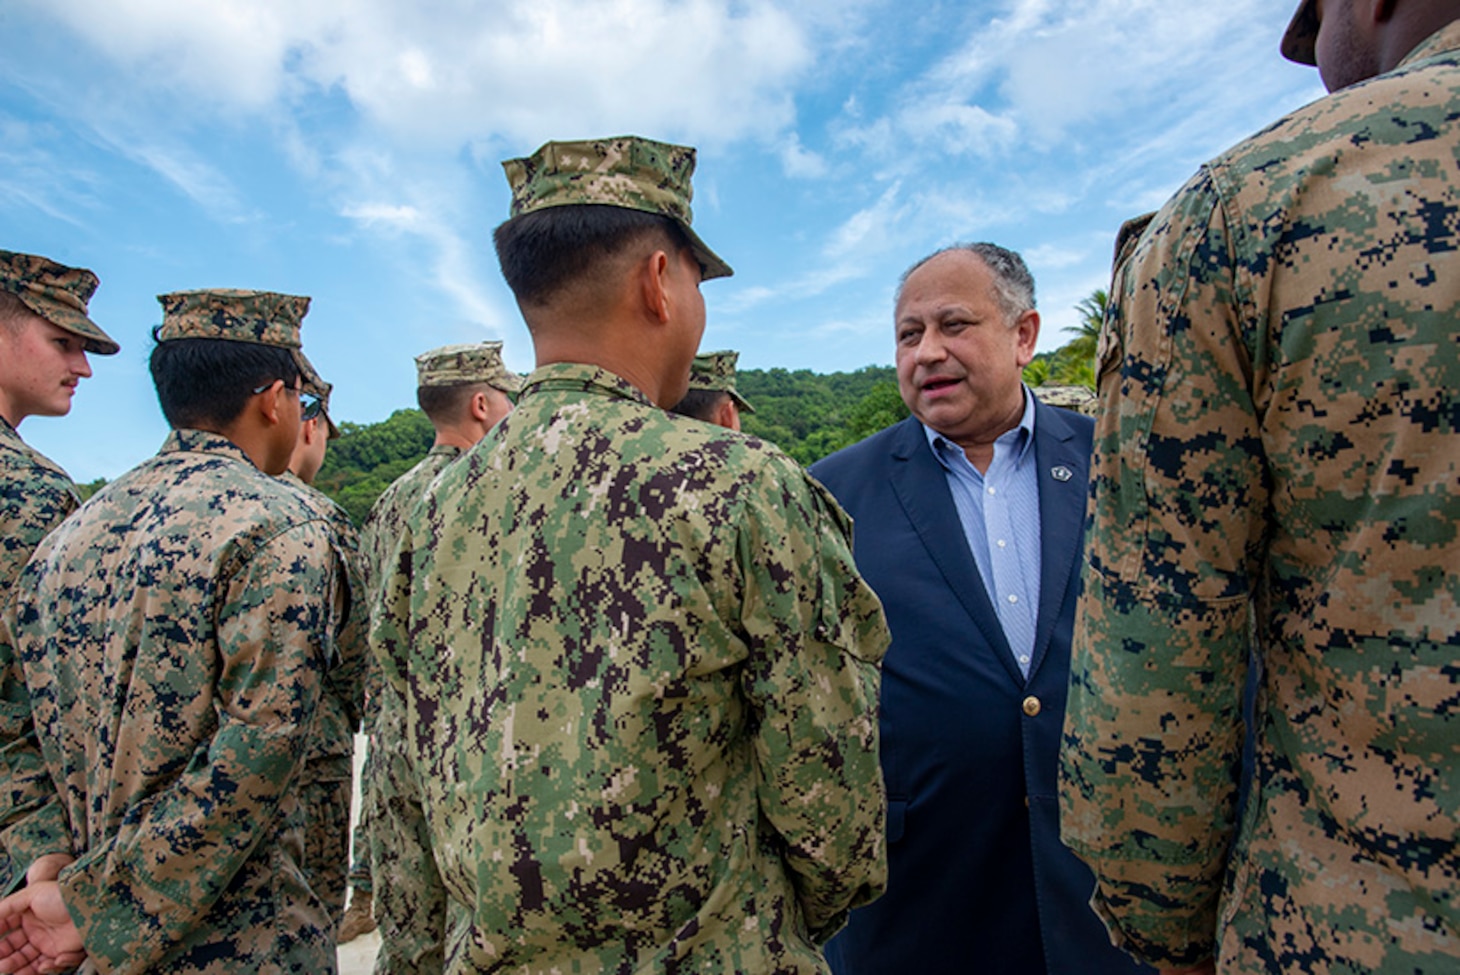 KOROR, Republic of Palau (March 1, 2024) – Secretary of the Navy Carlos Del Toro meets with Seabees in the Republic of Palau, March 1. Secretary Del Toro’s visit to Palau is part of a series of strategic engagements in the Indo-Pacific to promote the protection of the maritime commons in line with his Maritime Statecraft efforts. (U.S. Navy photo by Shaina O’Neal/Released)